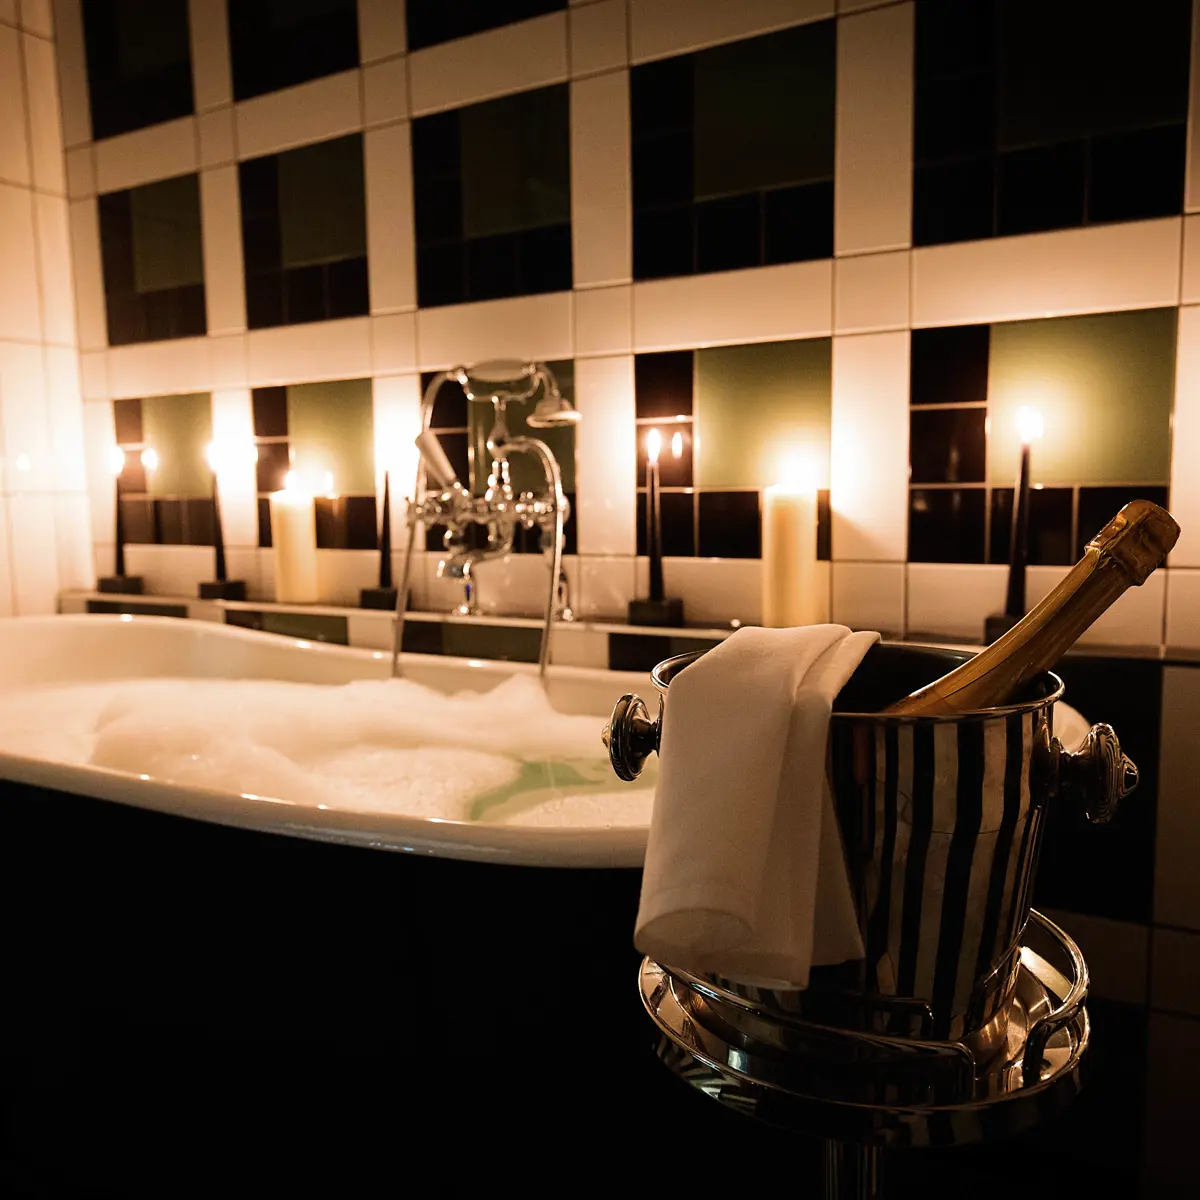 Champagne bottle placed in a bathtub.